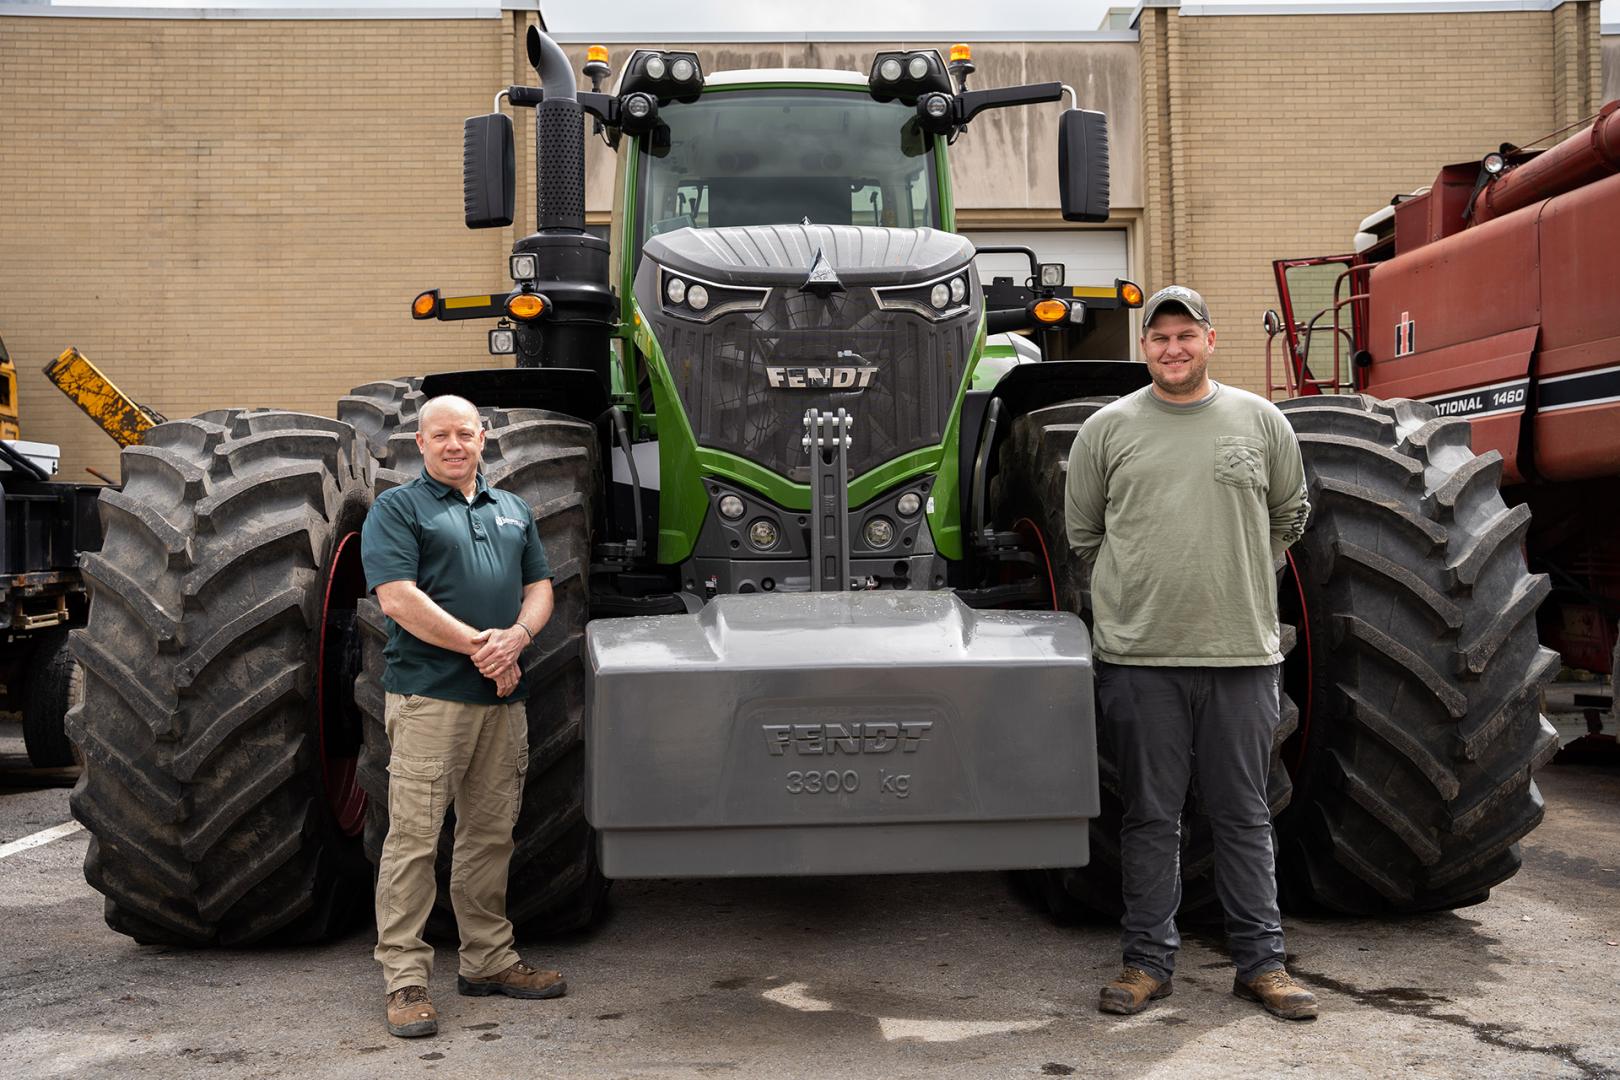 Associate Professor Charles "Chip" Ax ’89, left, and Instructor Jared Ford ’07 of the agricultural engineering and diesel technology programs, stand in front of a tractor students repaired in labs.